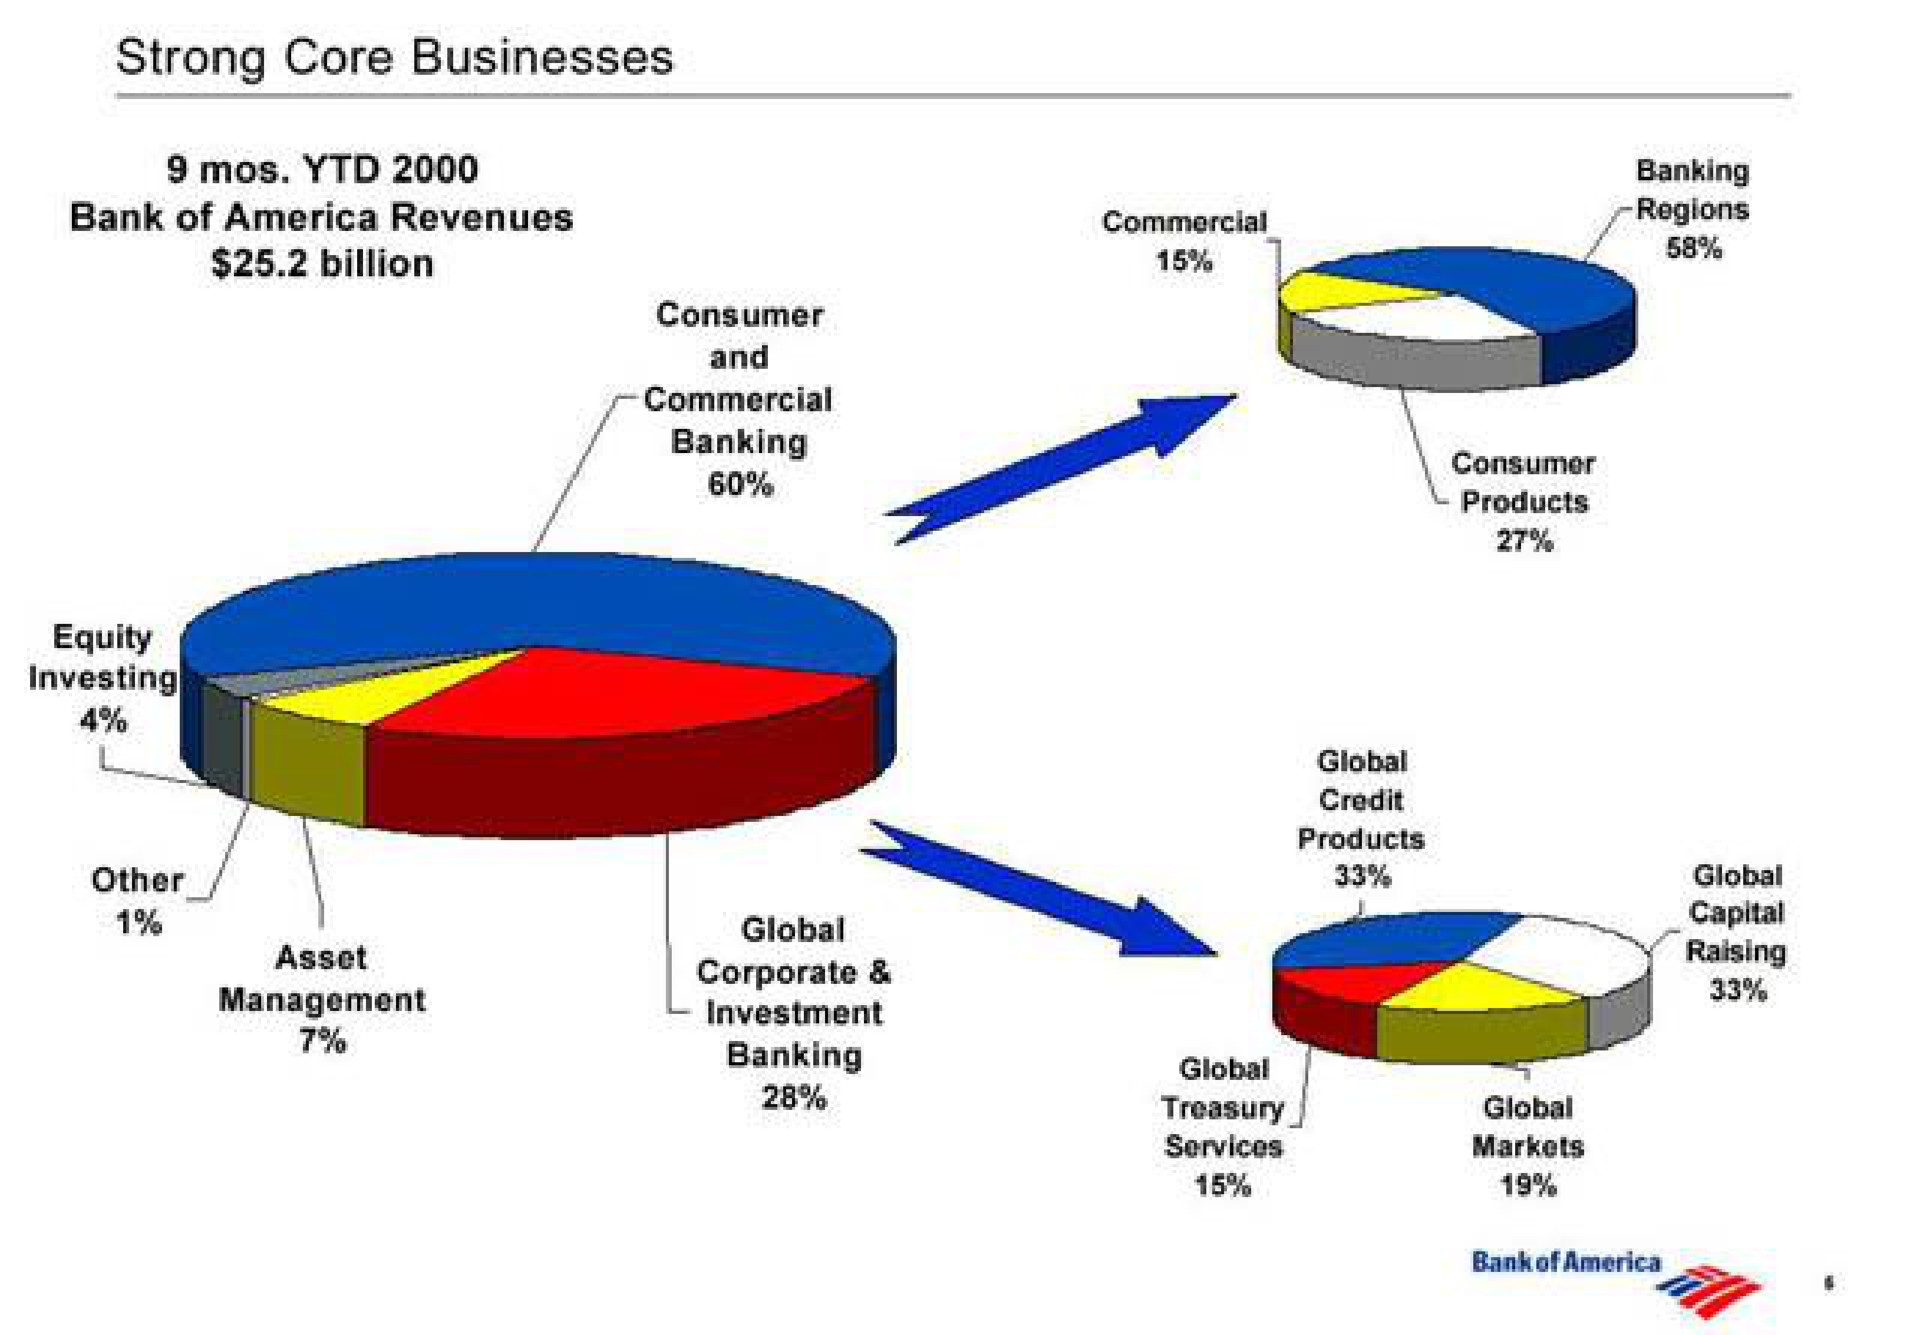 strong core businesses treasury global | Bank of America